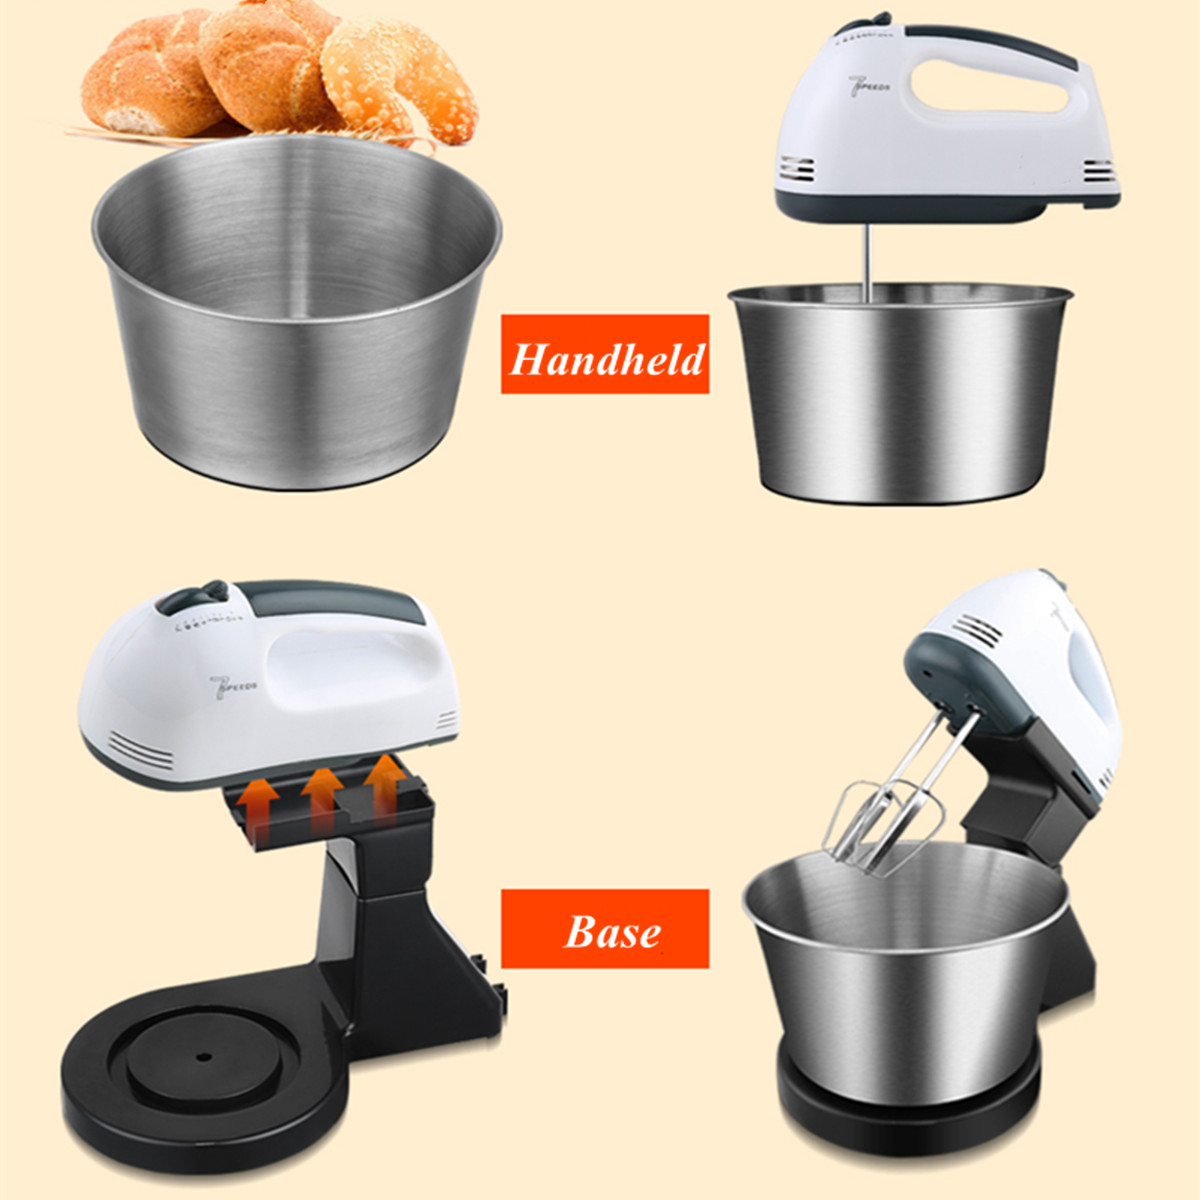 7 Speed Electric Egg Beater Dough Cakes Bread Egg Stand Mixer + Hand Blender + Bowl Food Mixer Kitchen Accessories Egg Tools 37